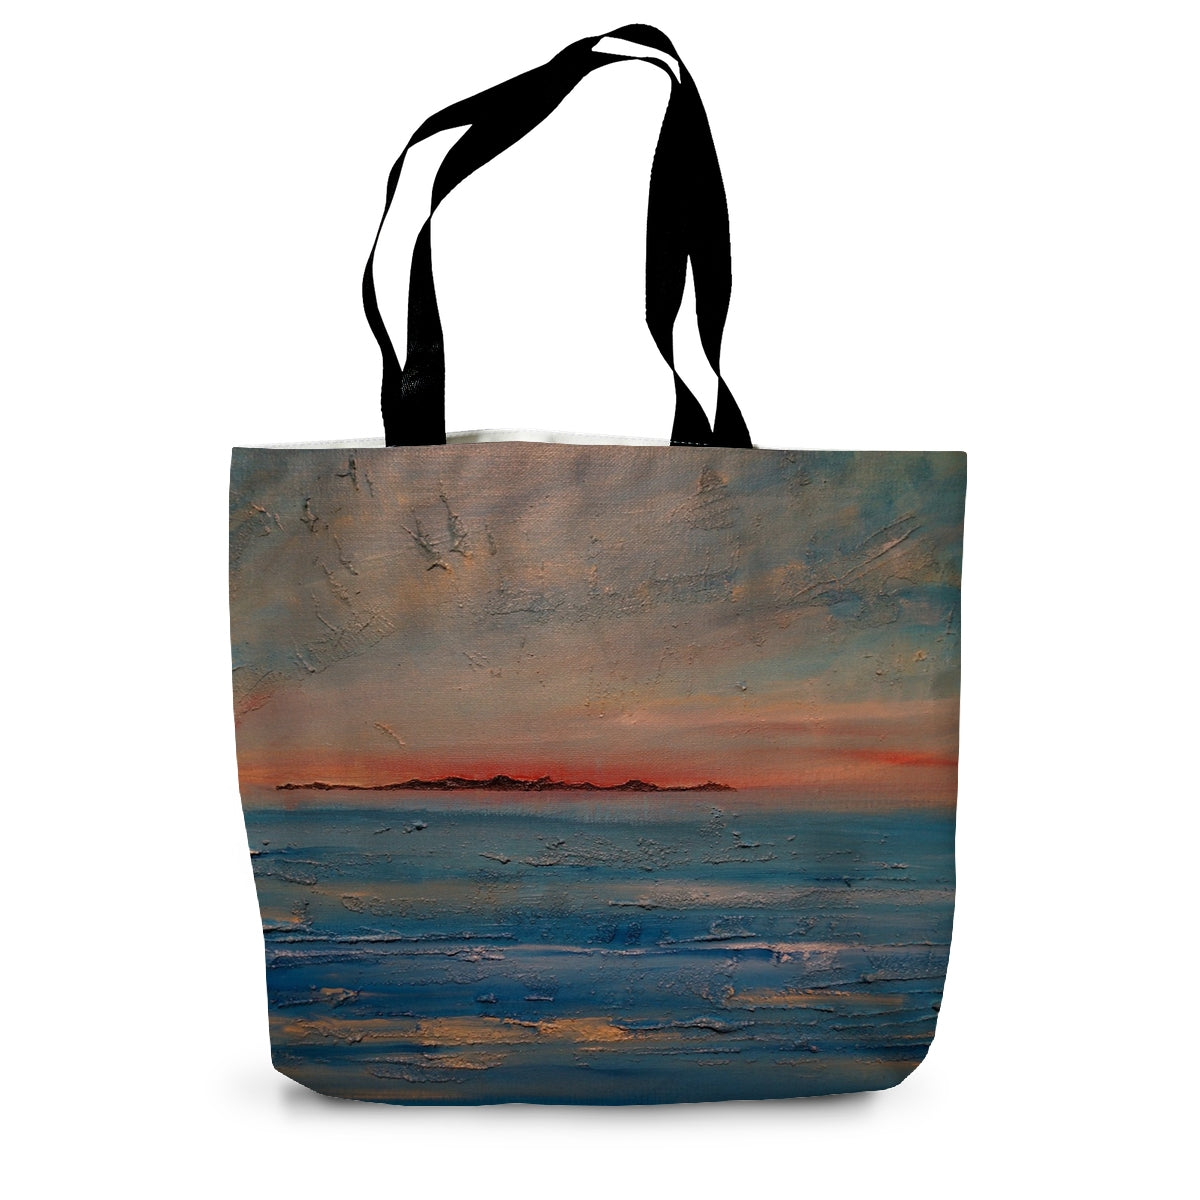 Gigha Sunset Art Gifts Canvas Tote Bag-Bags-Hebridean Islands Art Gallery-14"x18.5"-Paintings, Prints, Homeware, Art Gifts From Scotland By Scottish Artist Kevin Hunter